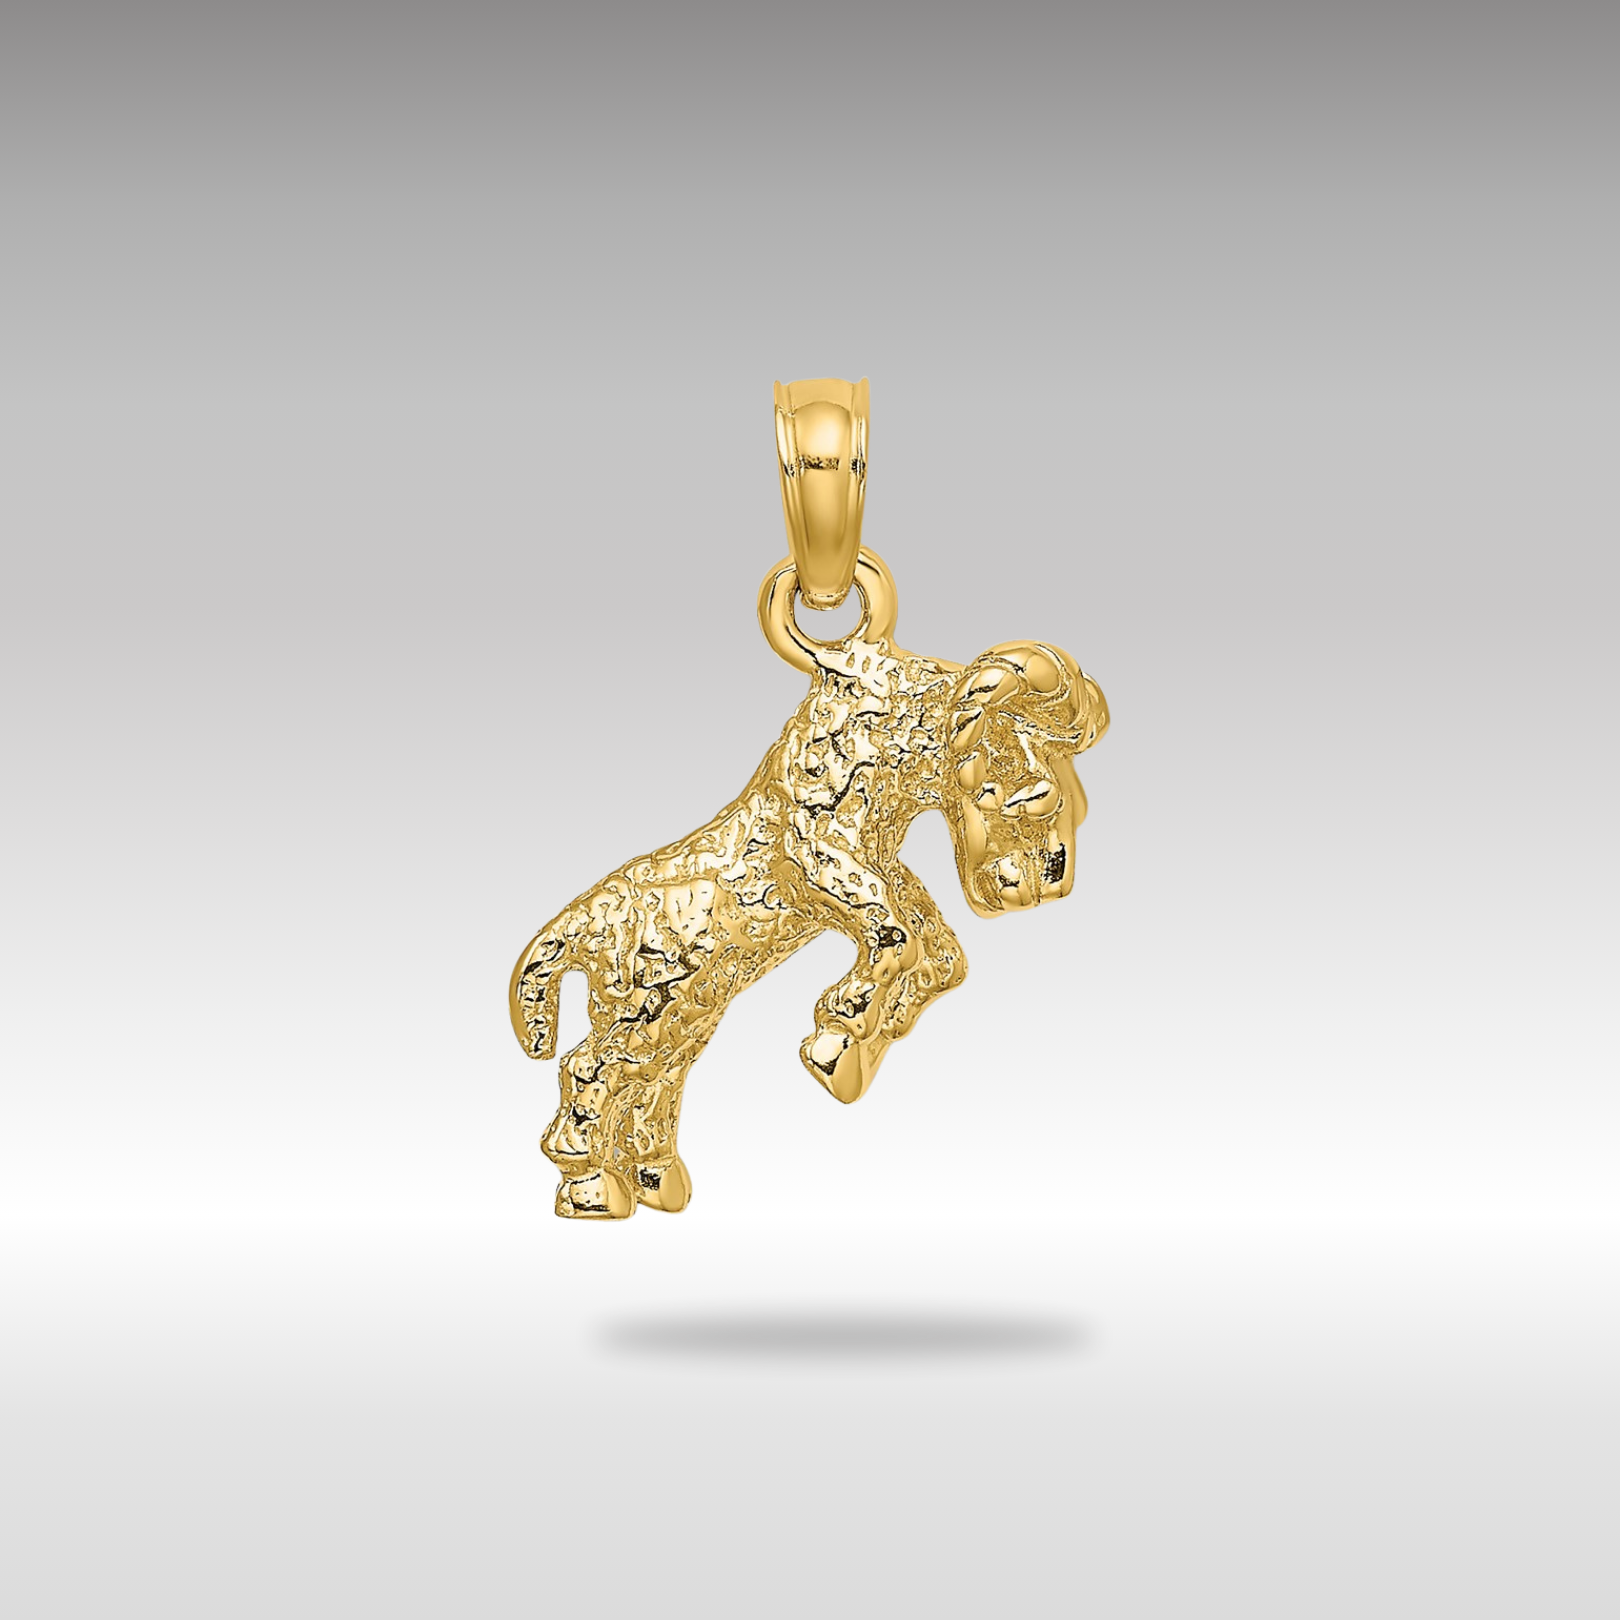 Gold 3-D Aries Ram Small Zodiac Charm Necklace Model-C3143